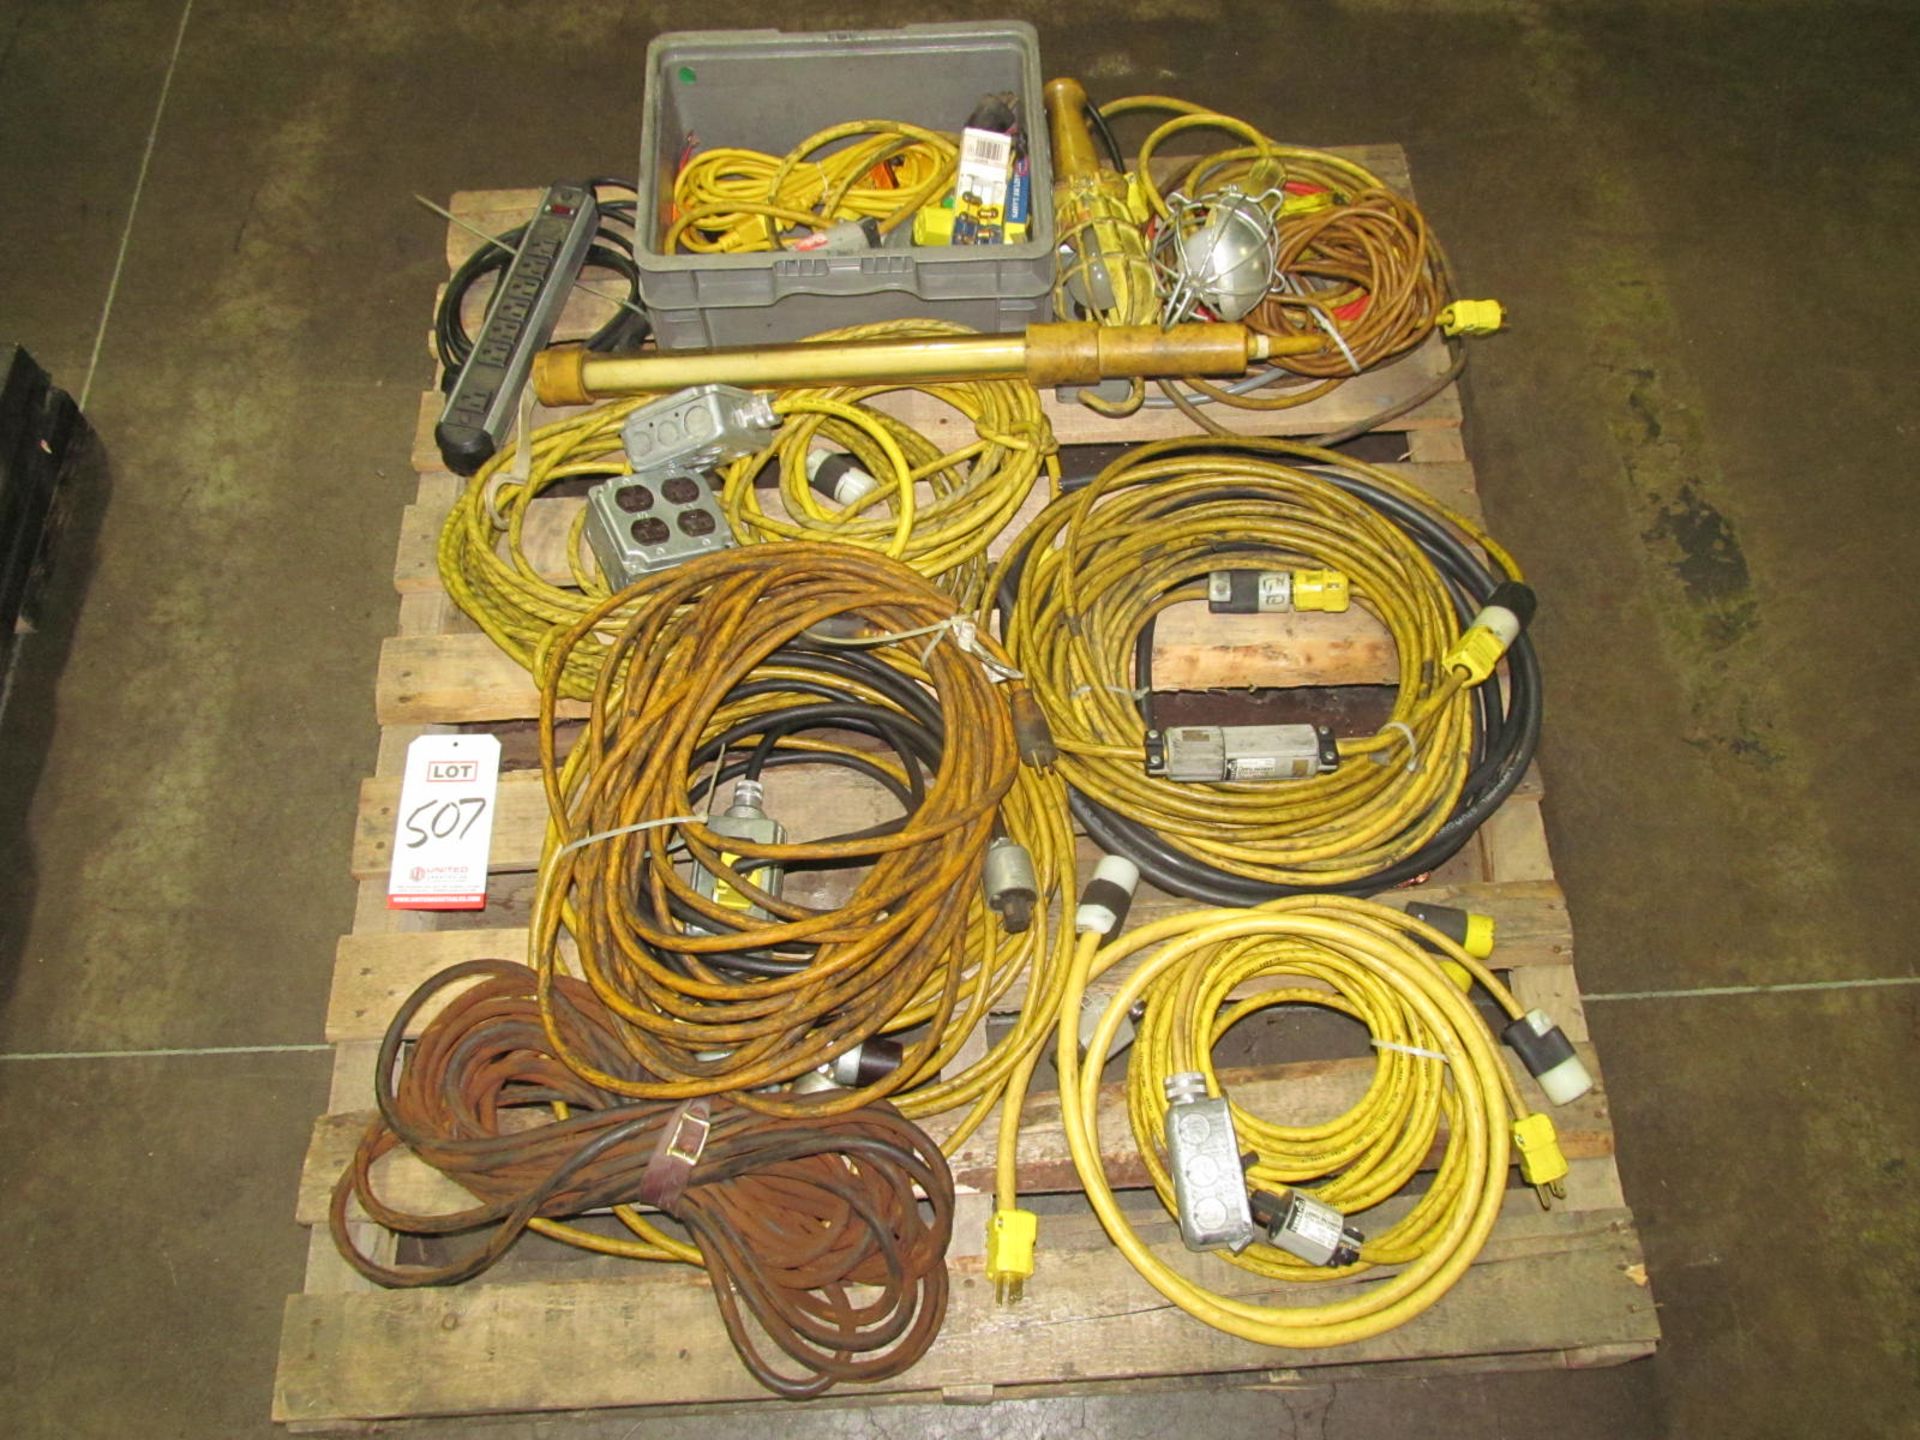 LOT - ASSORTED EXTENSION CORDS (LOC. O25)